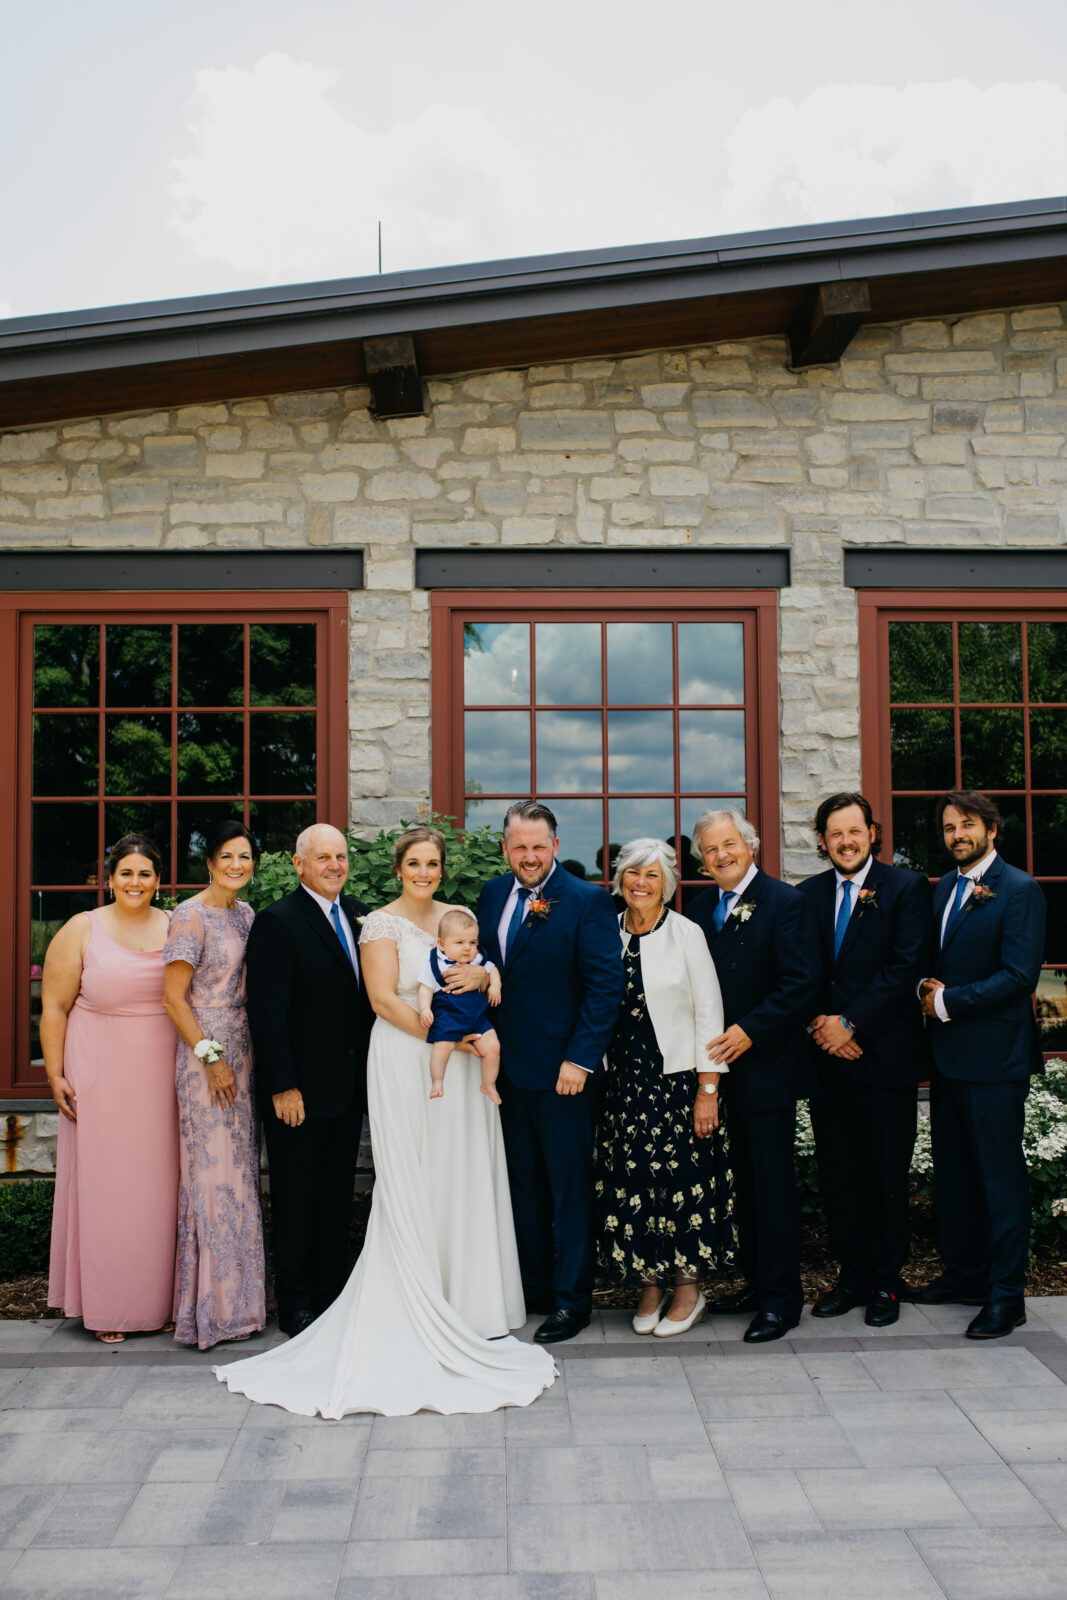 A photo of the newlywed couple's families